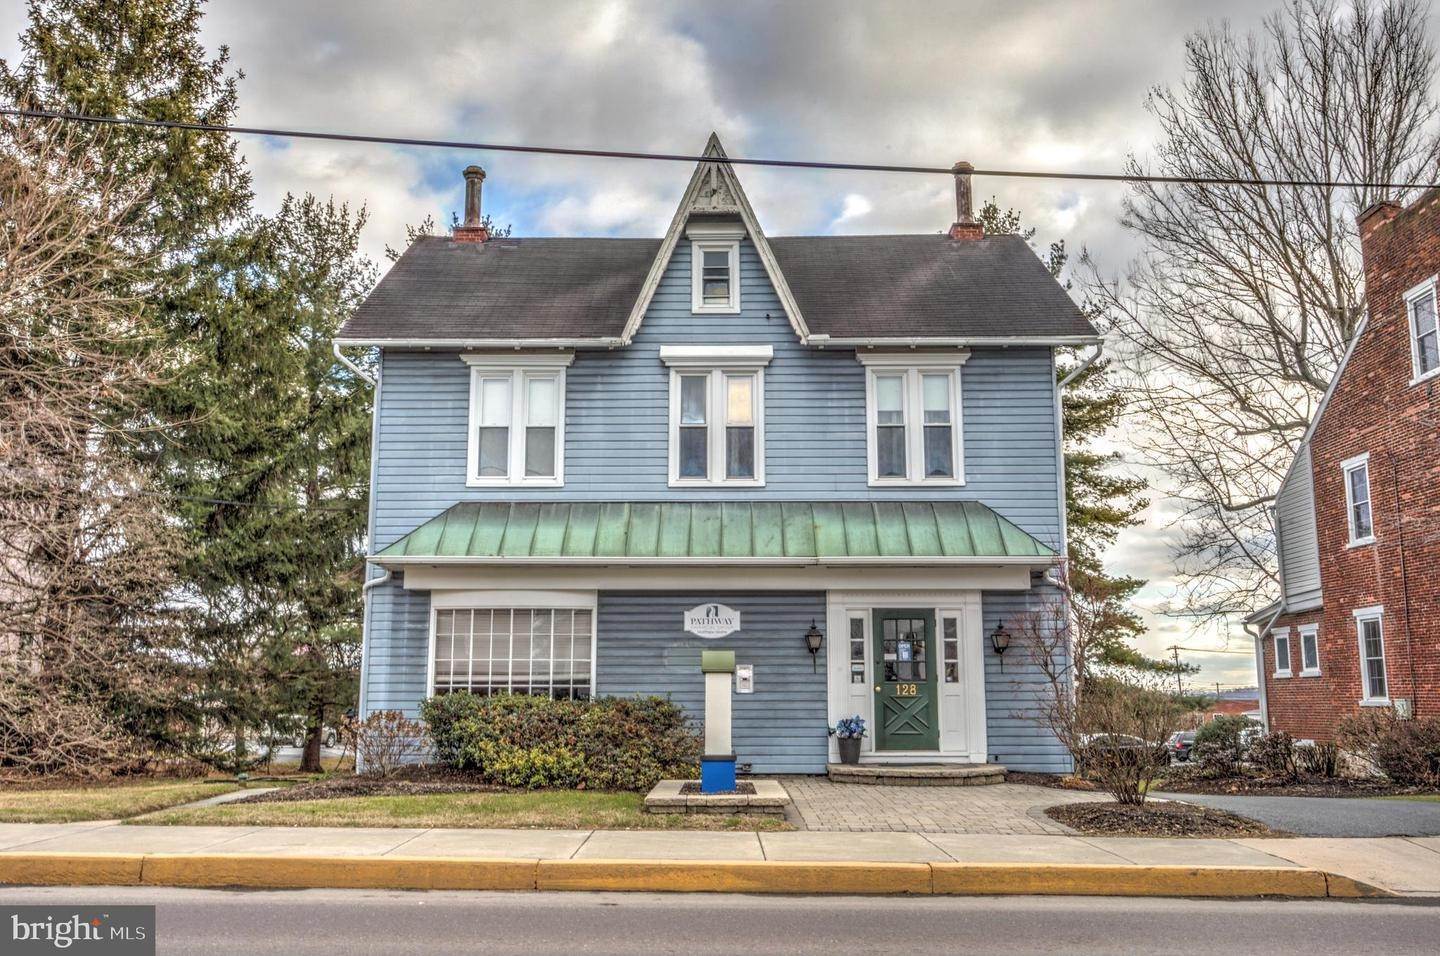 1. Commercial for Sale at 128 W MAIN Street New Holland, Pennsylvania 17557 United States